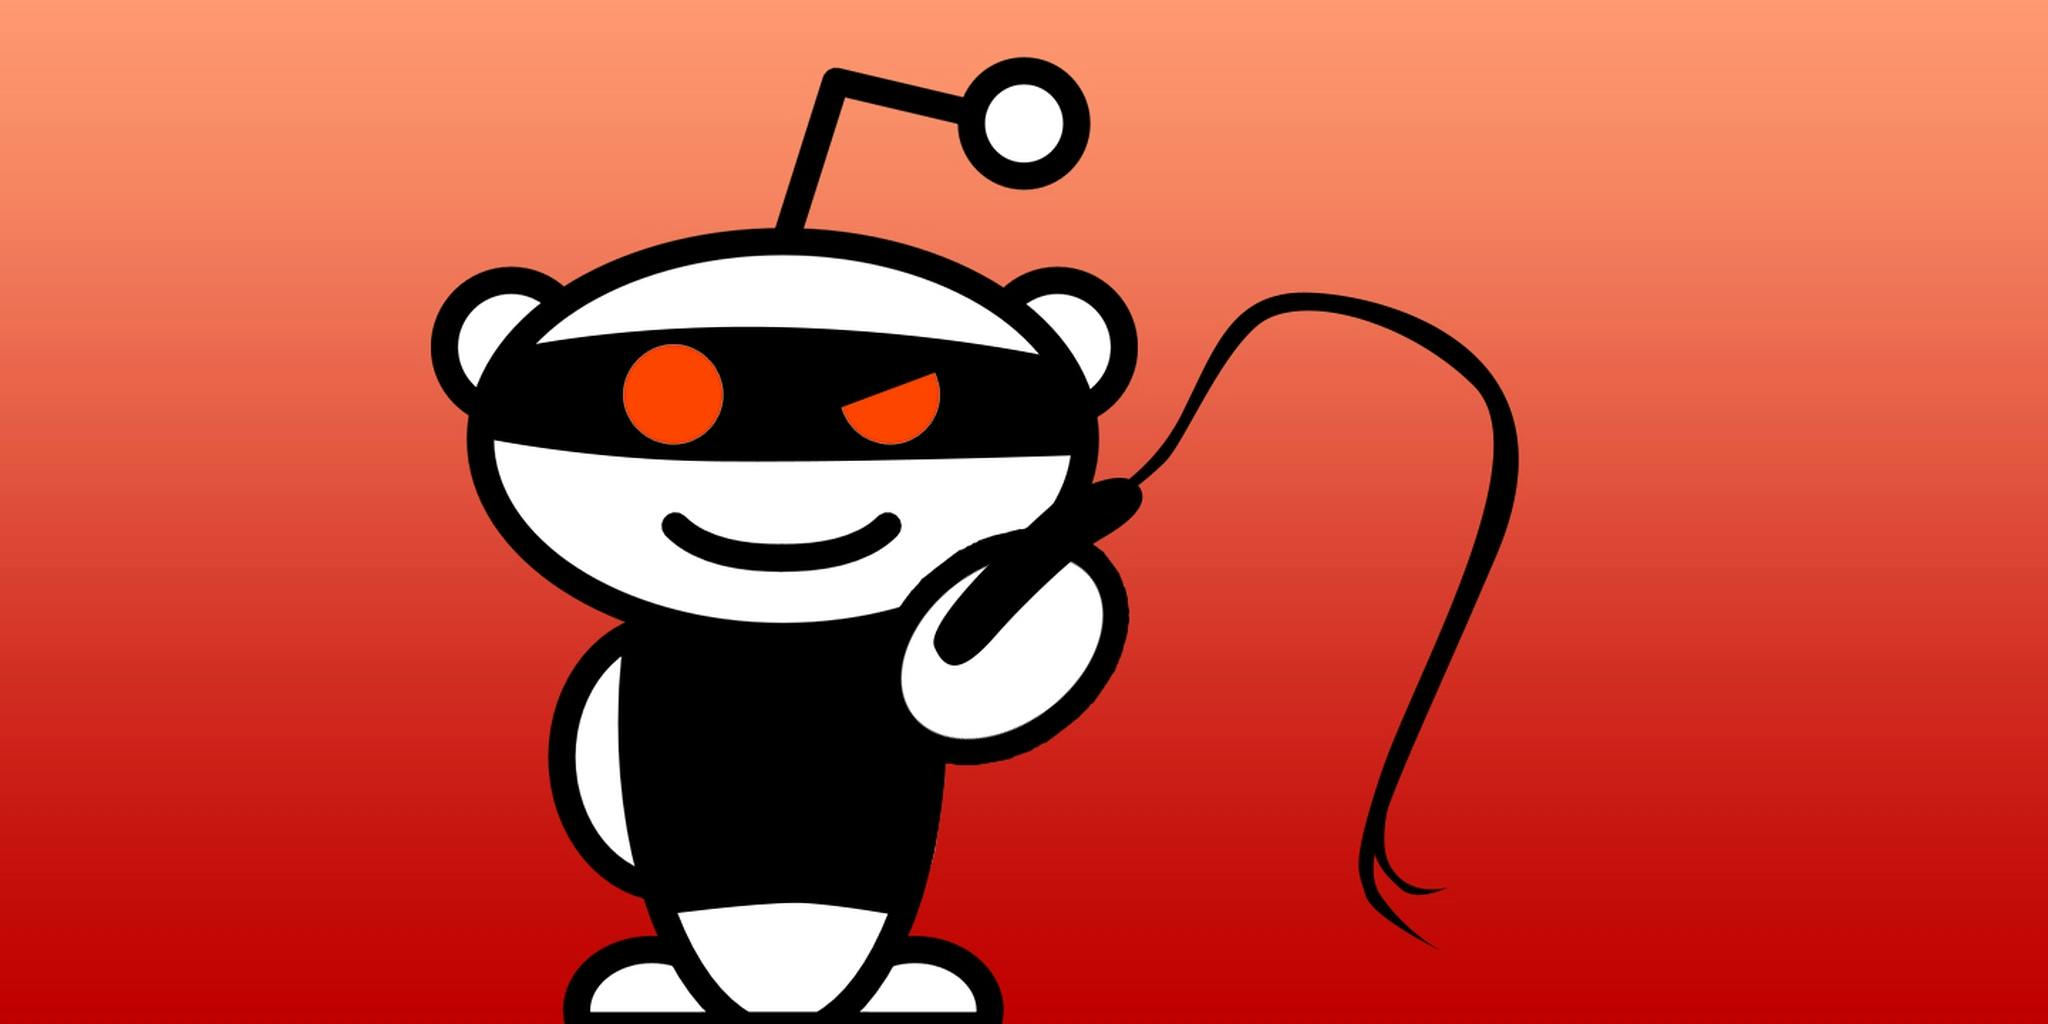 Get intimate with Reddit’s newest adult marketplace